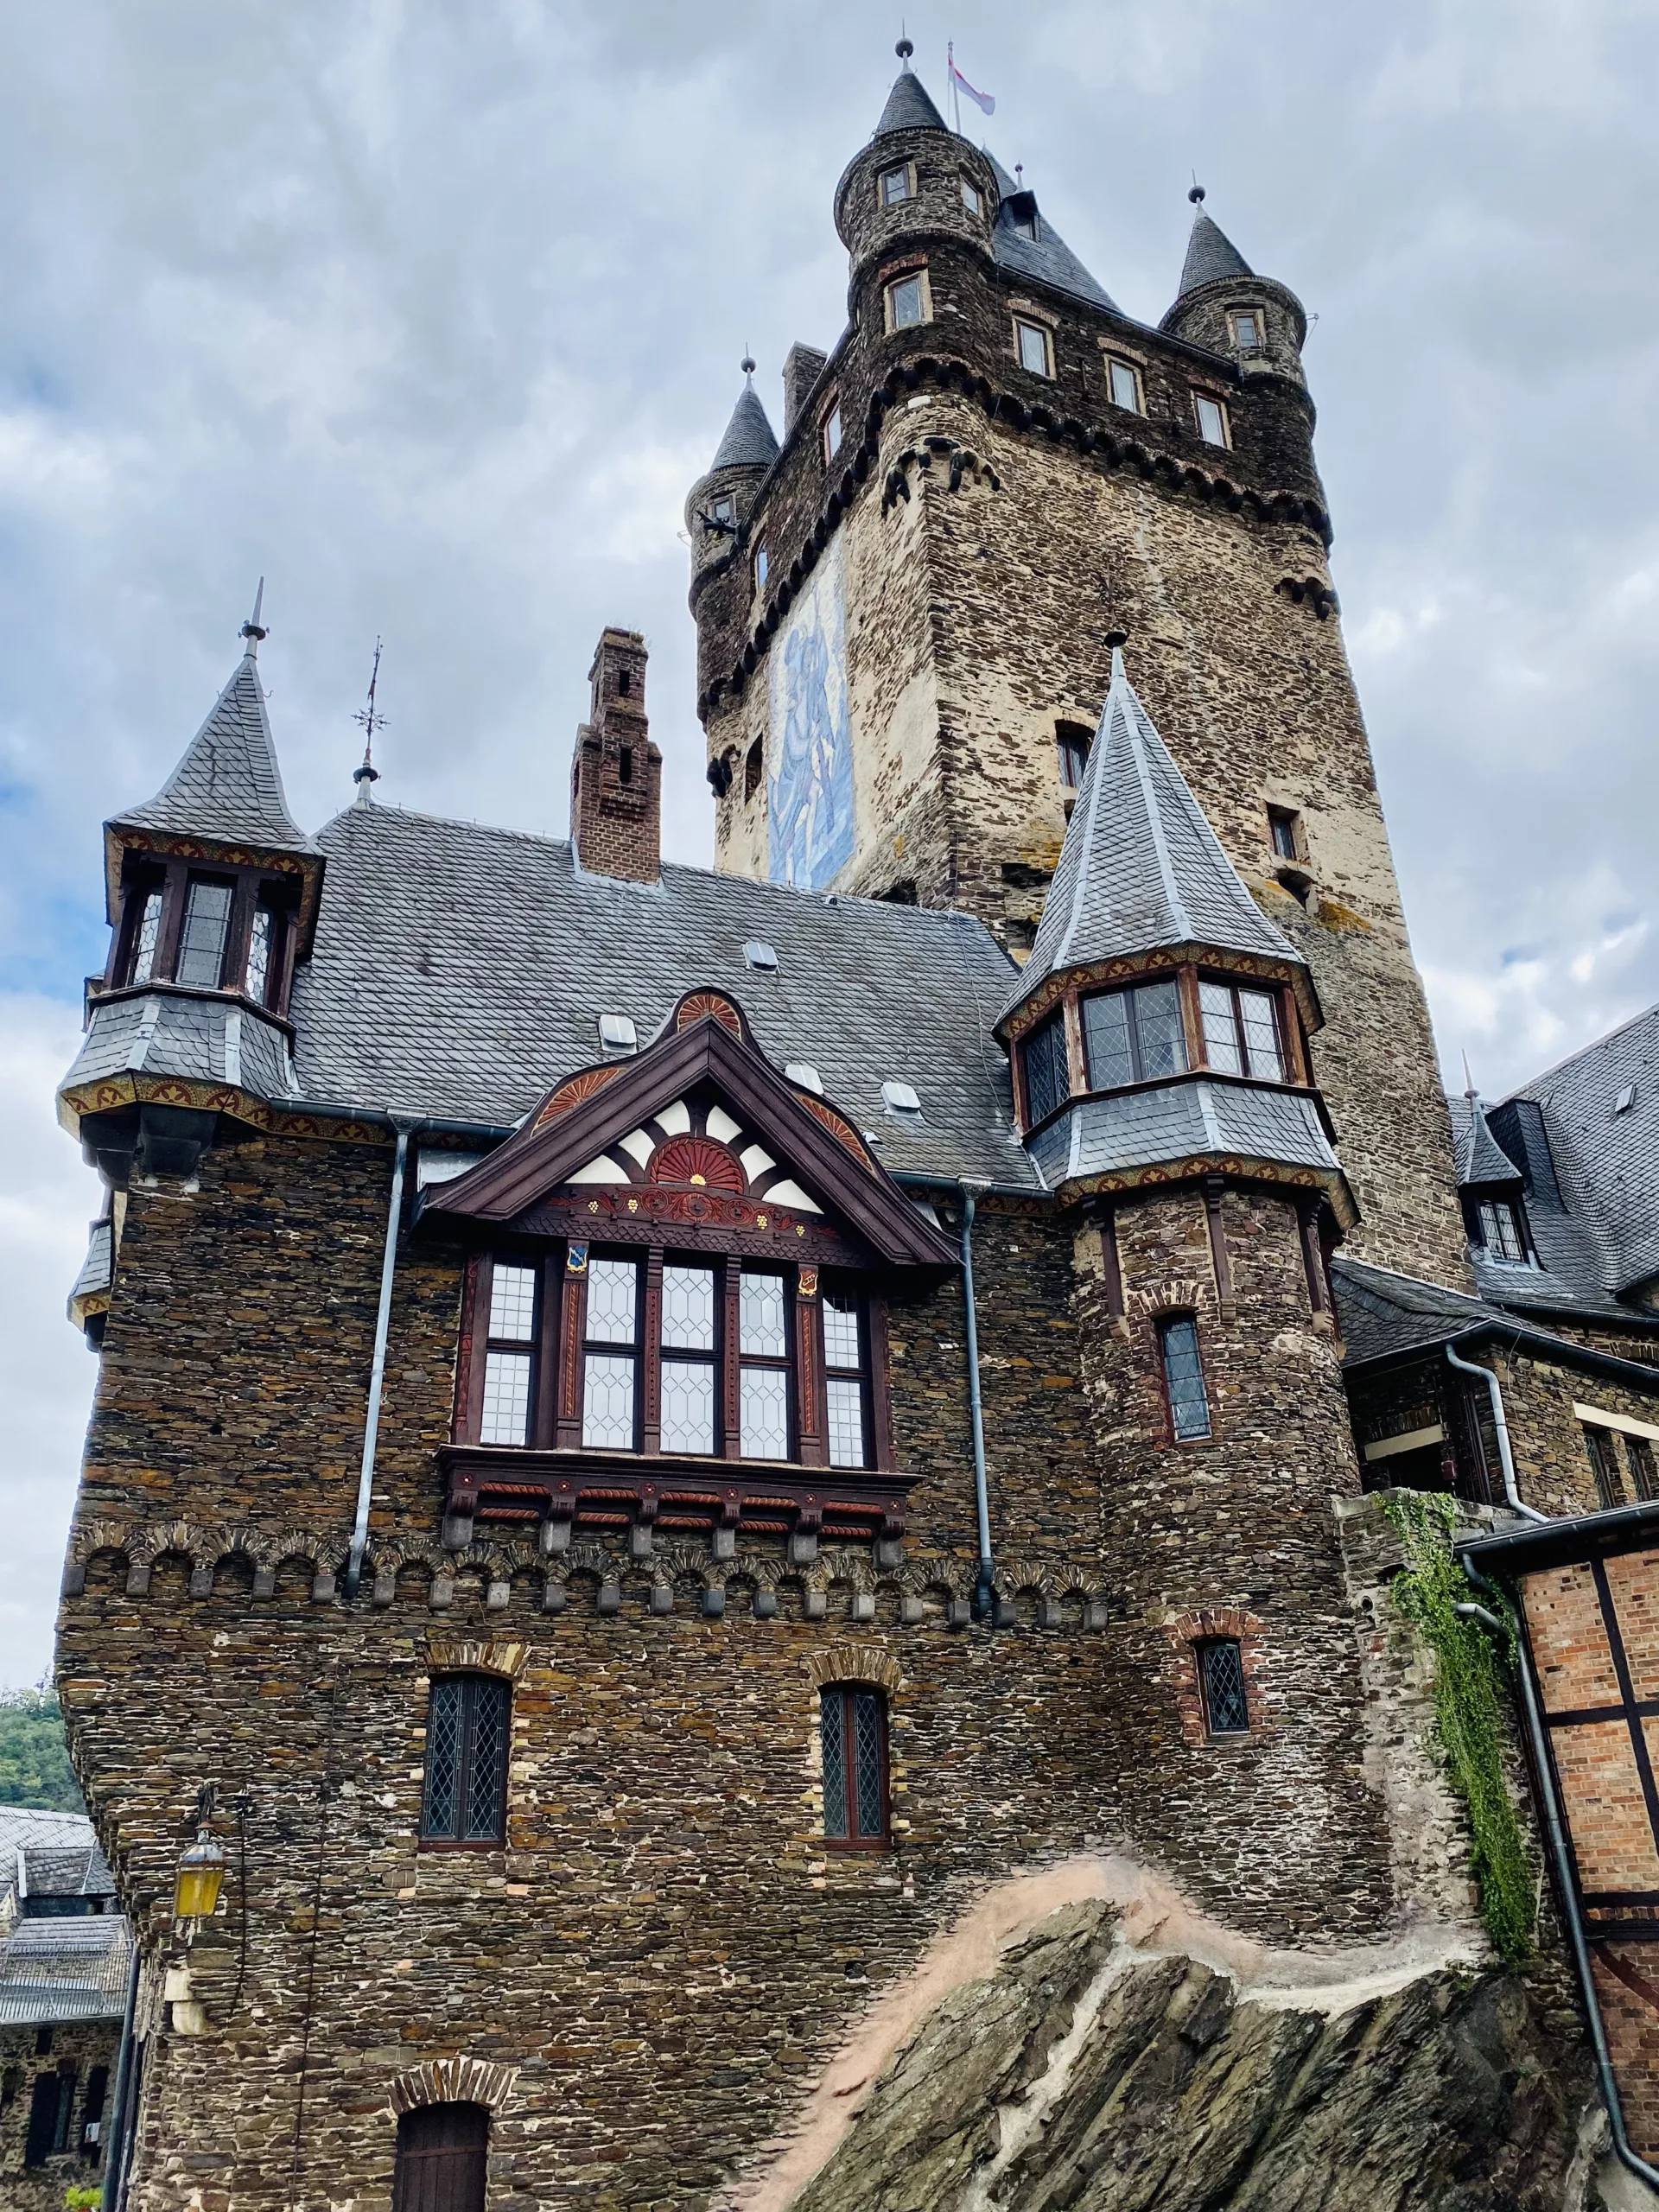 Reischburg Cochem Castle in Cochem, Germany rises up out of the rocks and is very impressive!